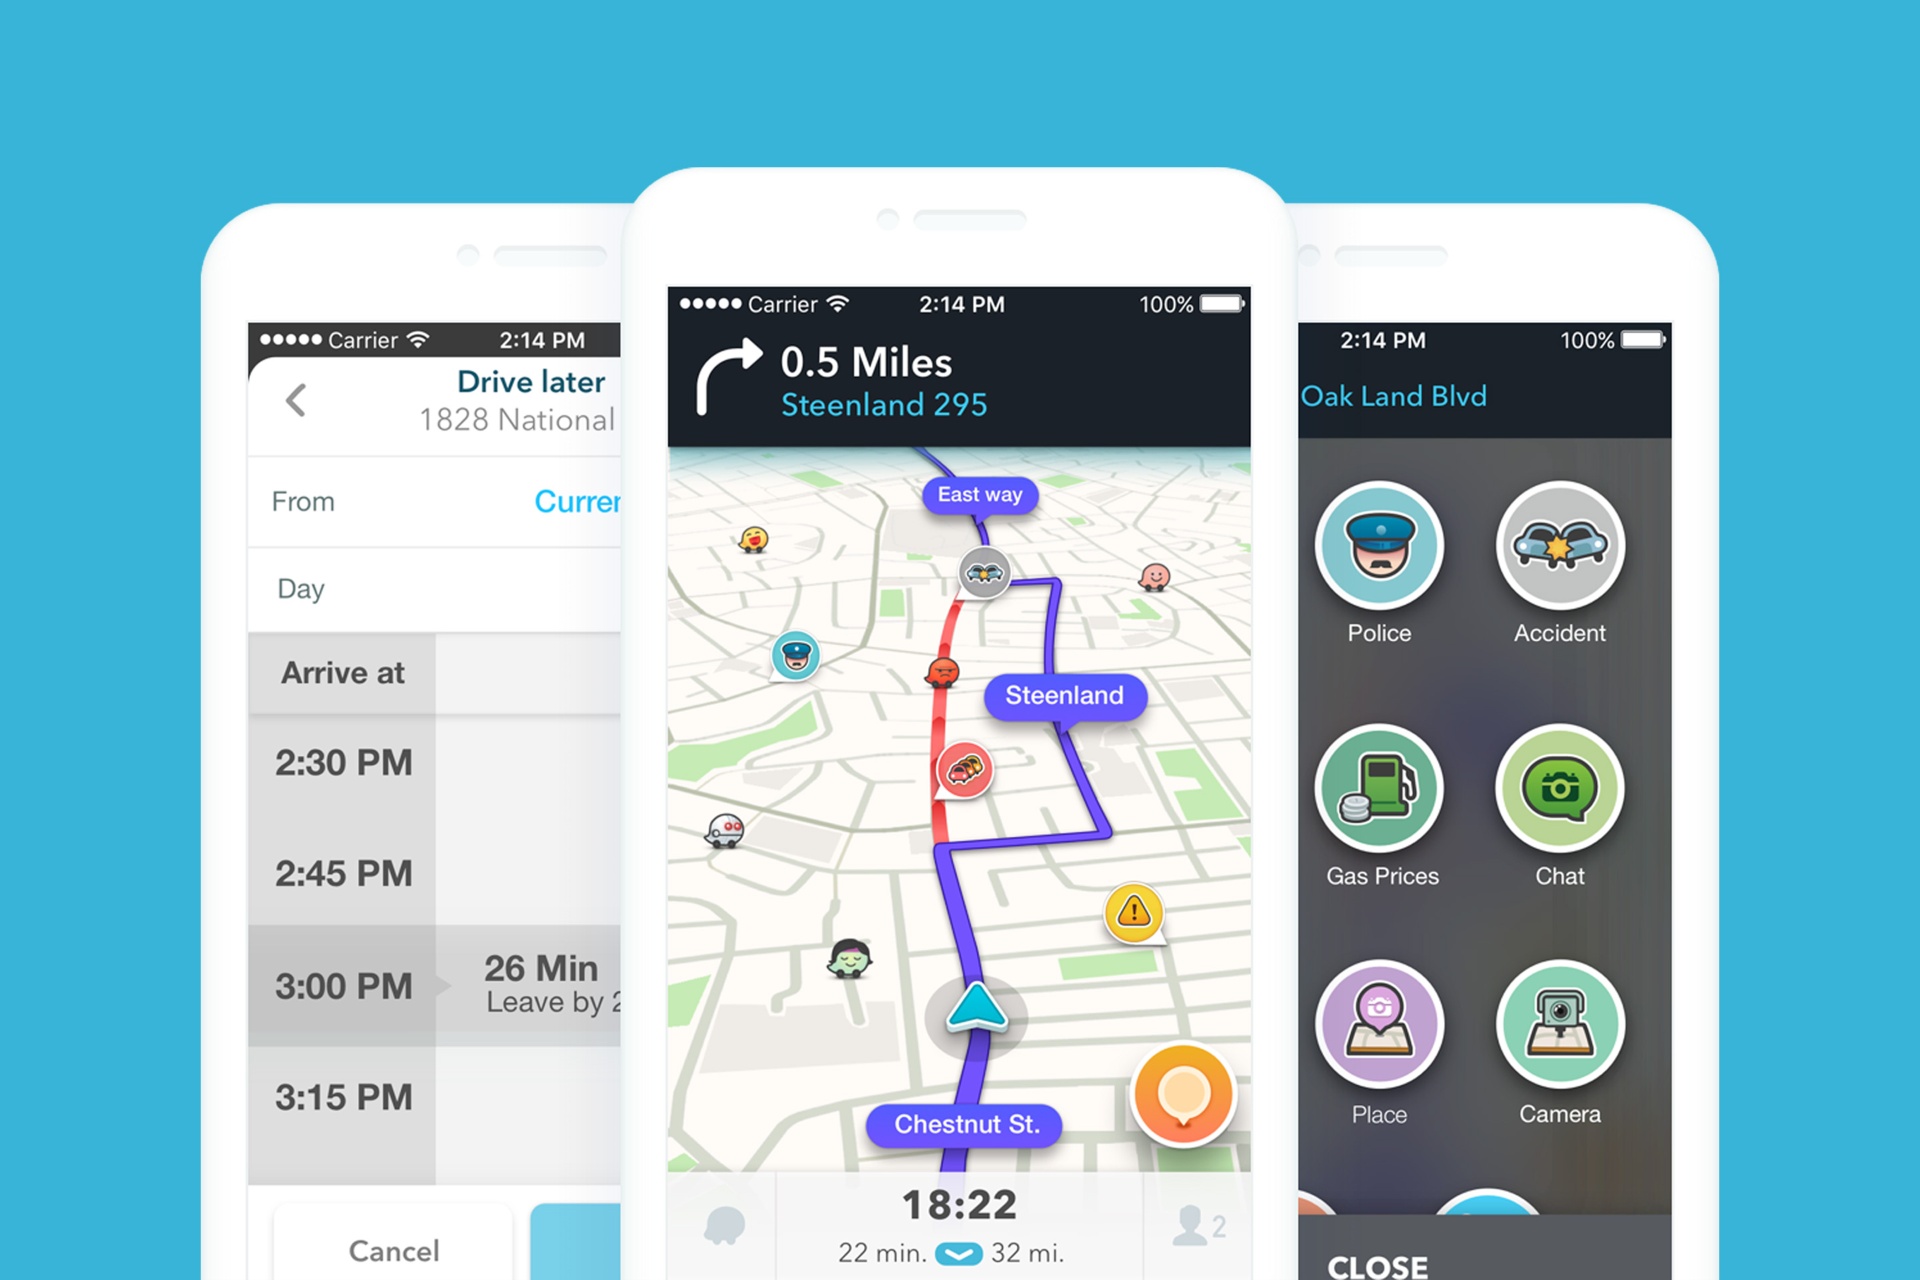 Check Out These Apps to Track a Car's Location